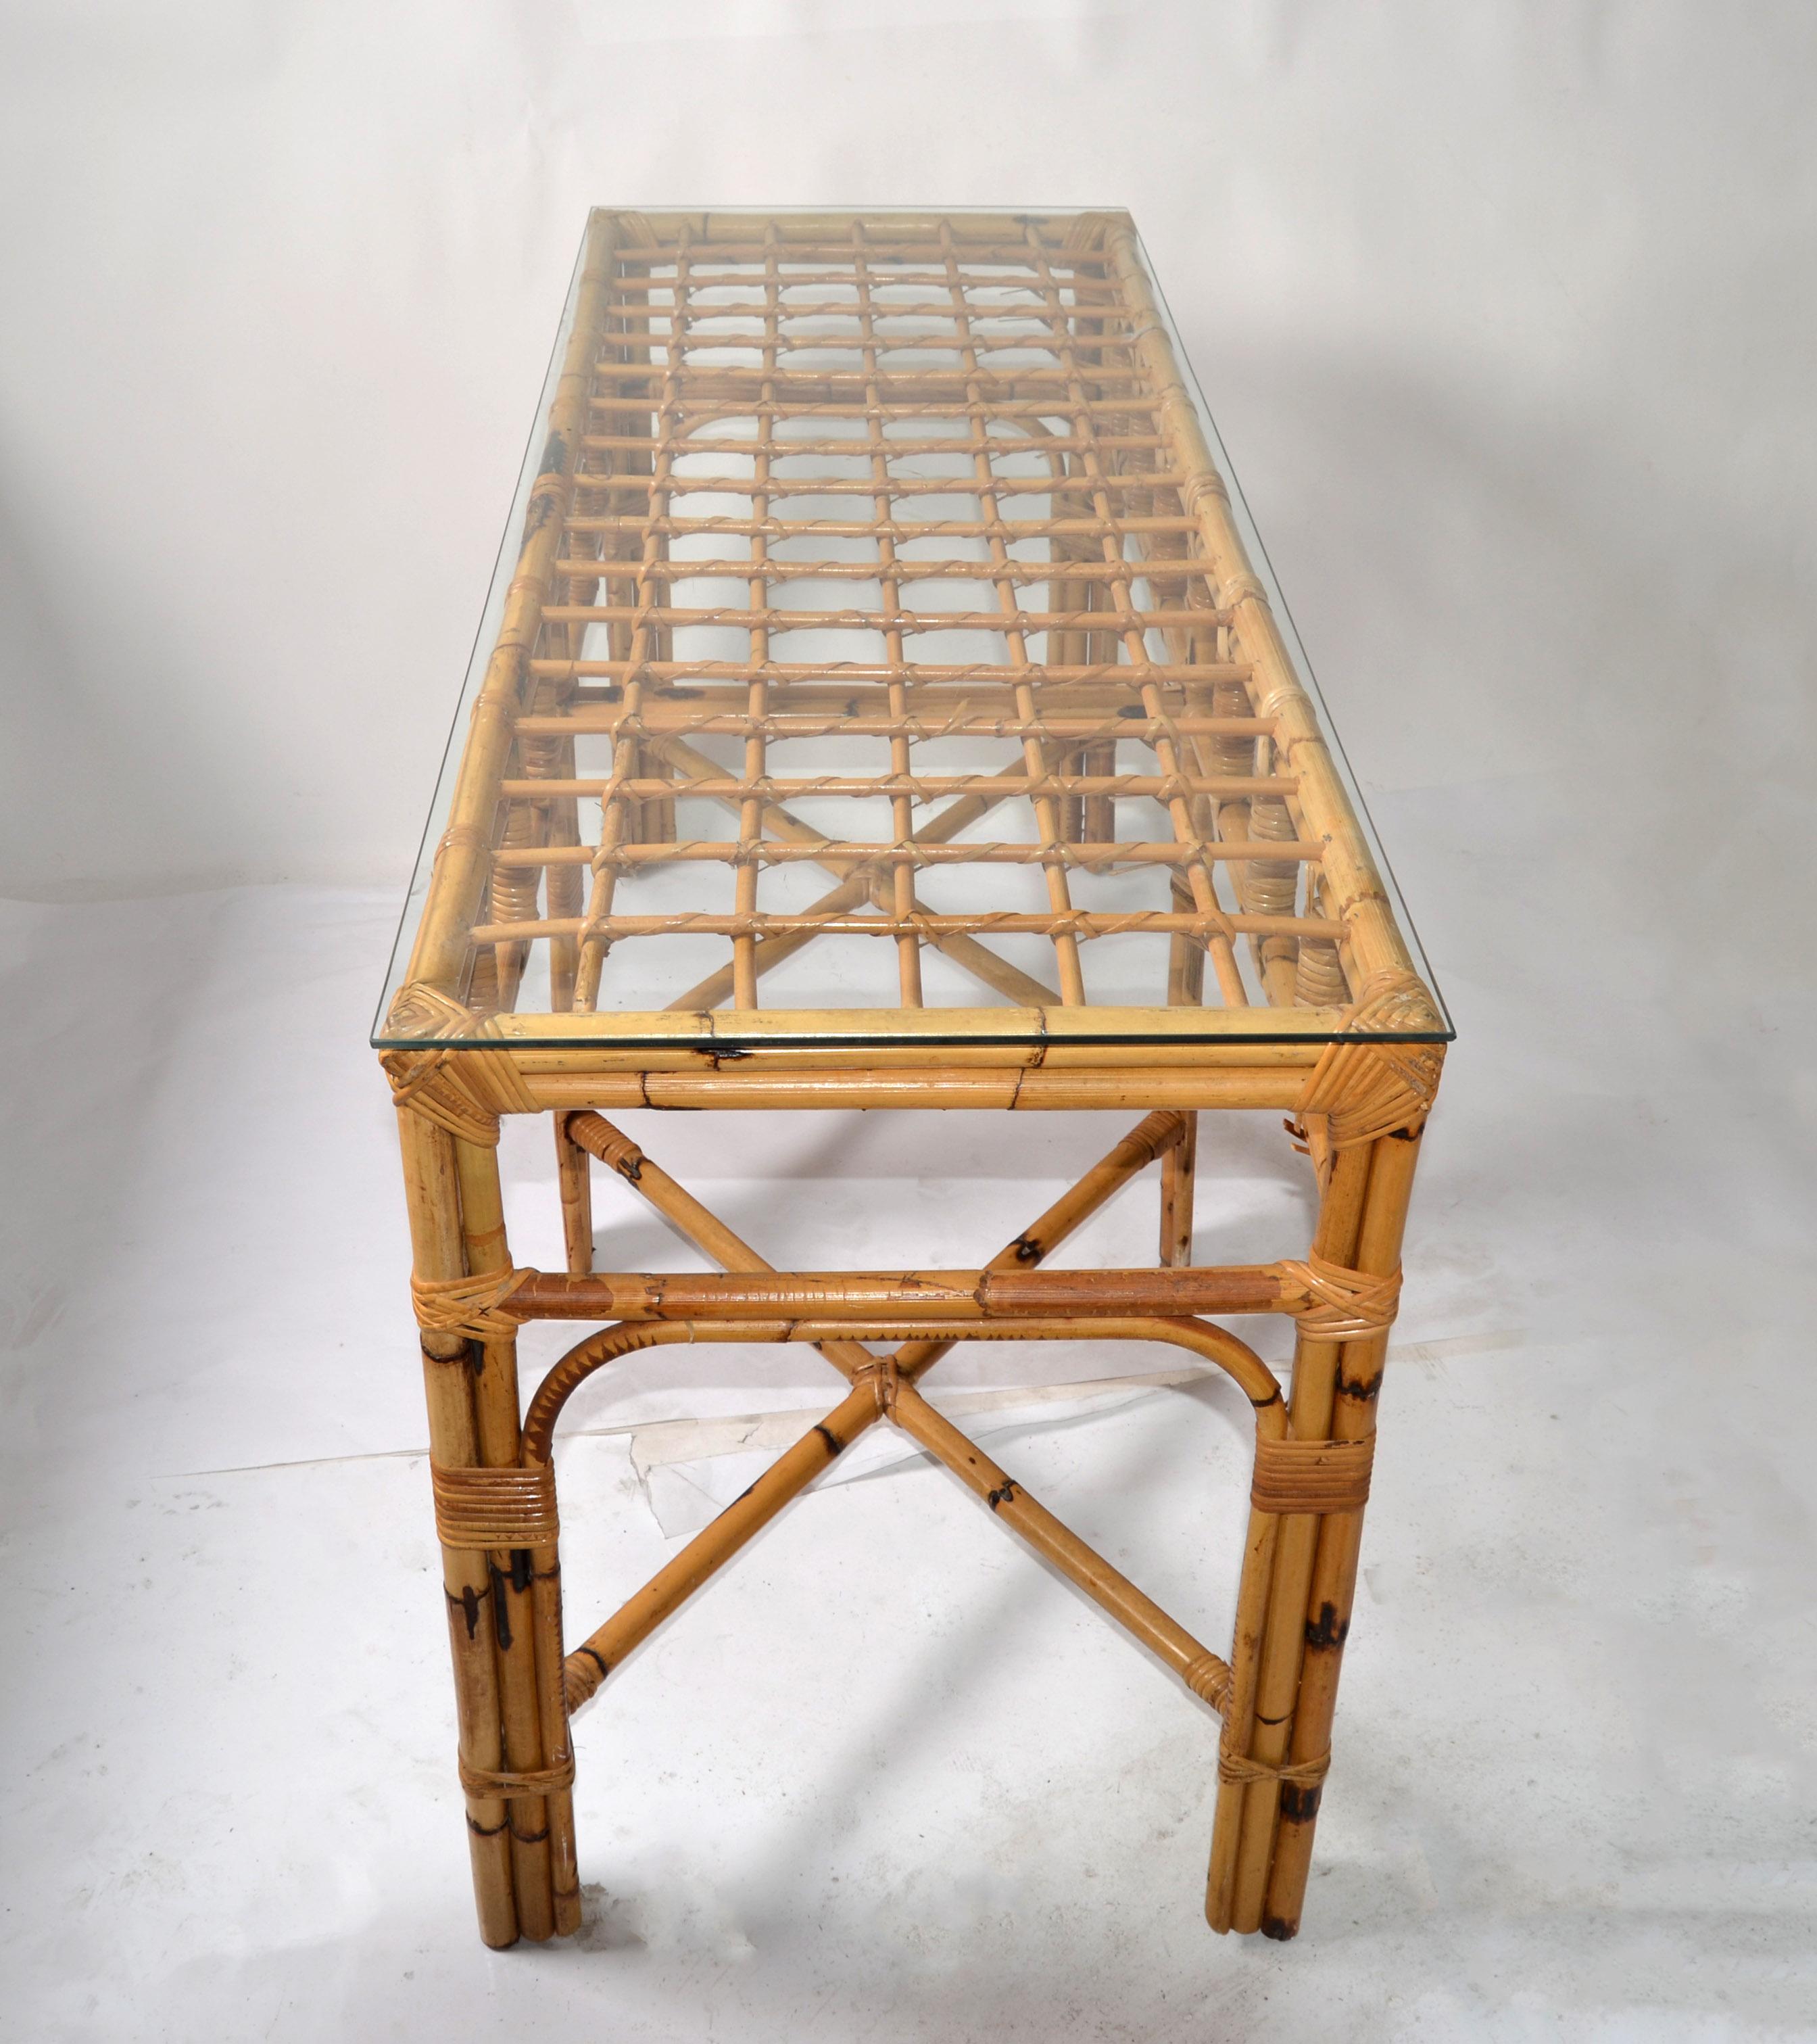 Hand-Crafted American Mid-Century Modern 6 Legs Bent Bamboo & Rattan Glass Top Console Table  For Sale